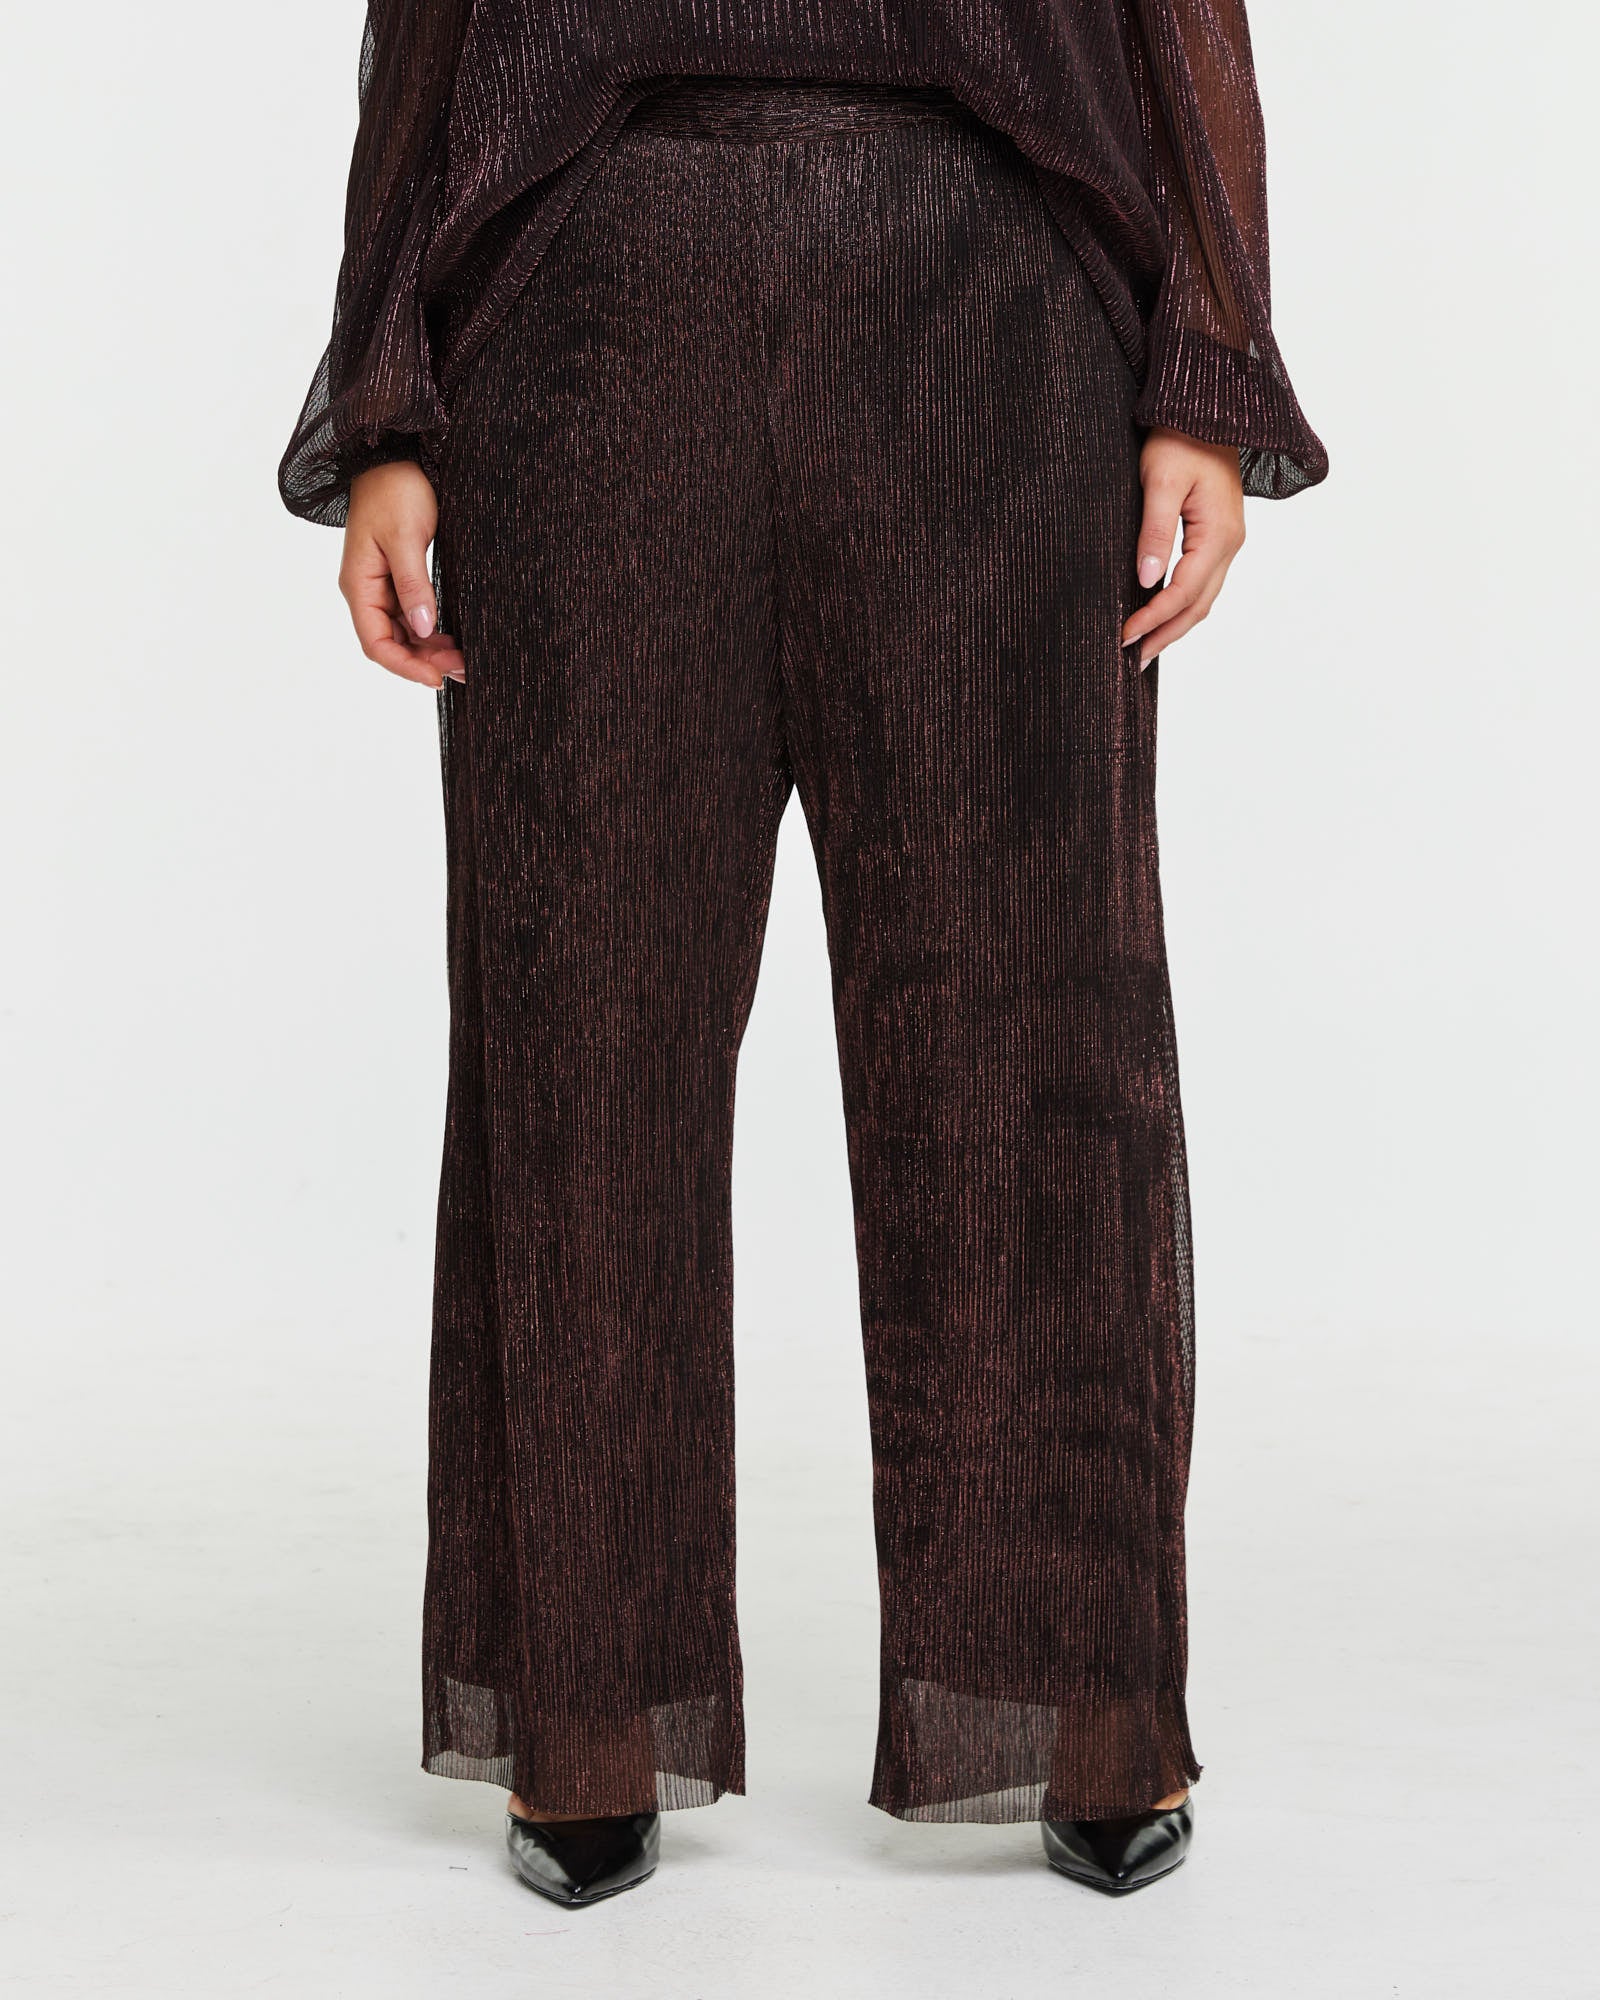 A model is wearing the Camille Lurex Pant with an elasticated waistband.